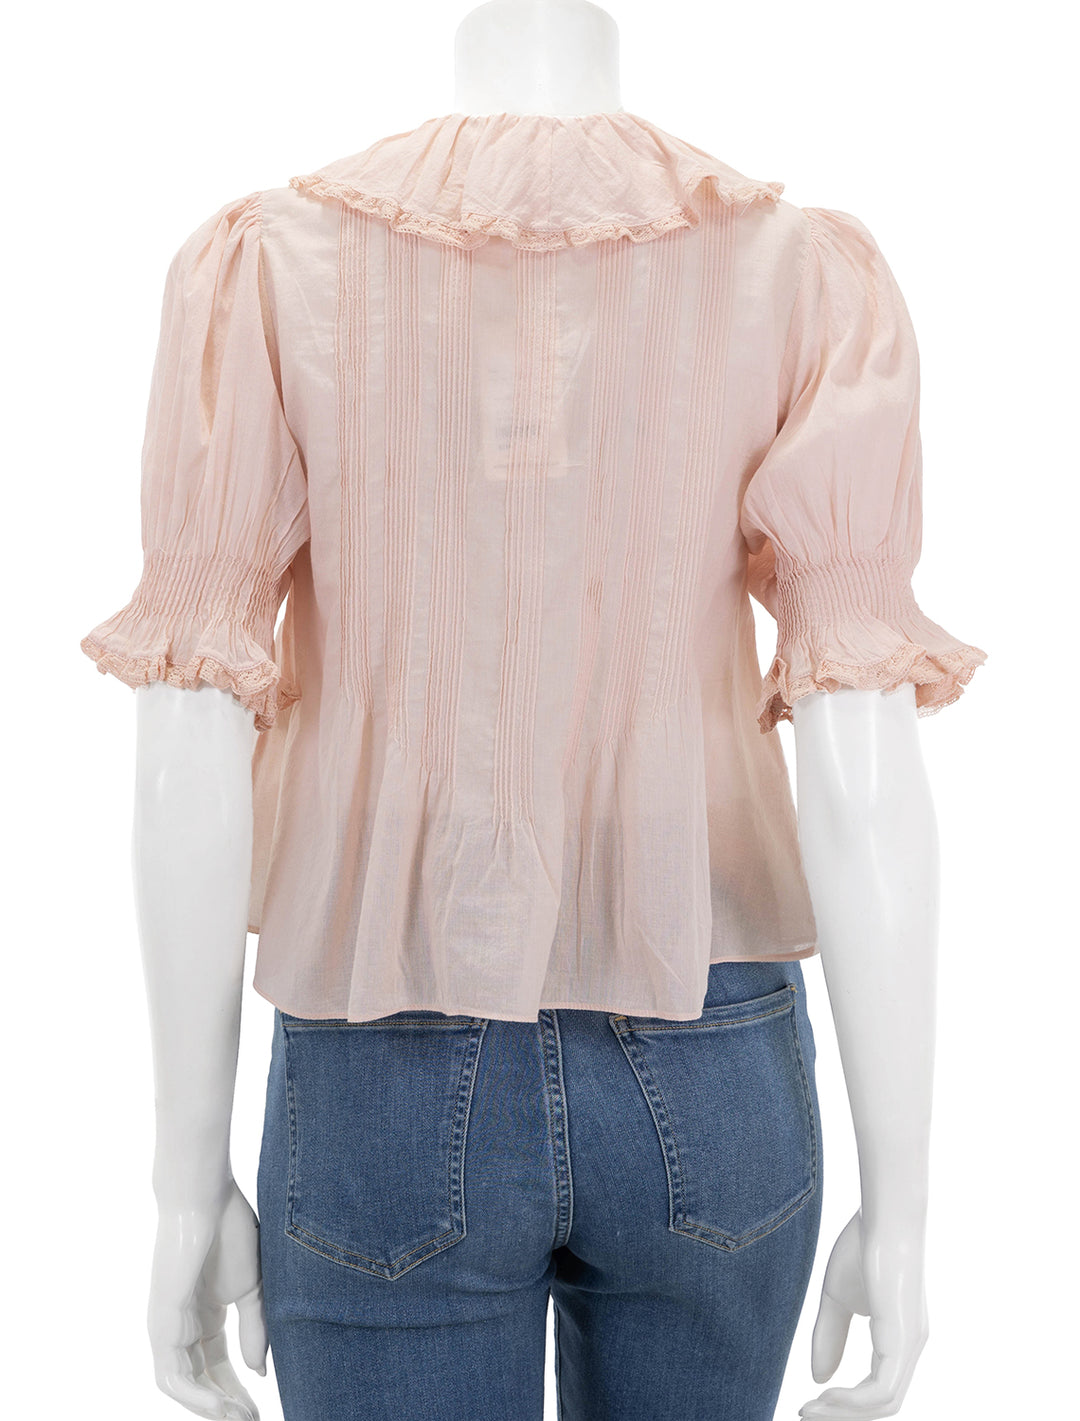 Back view of DOEN's henri top in blush.